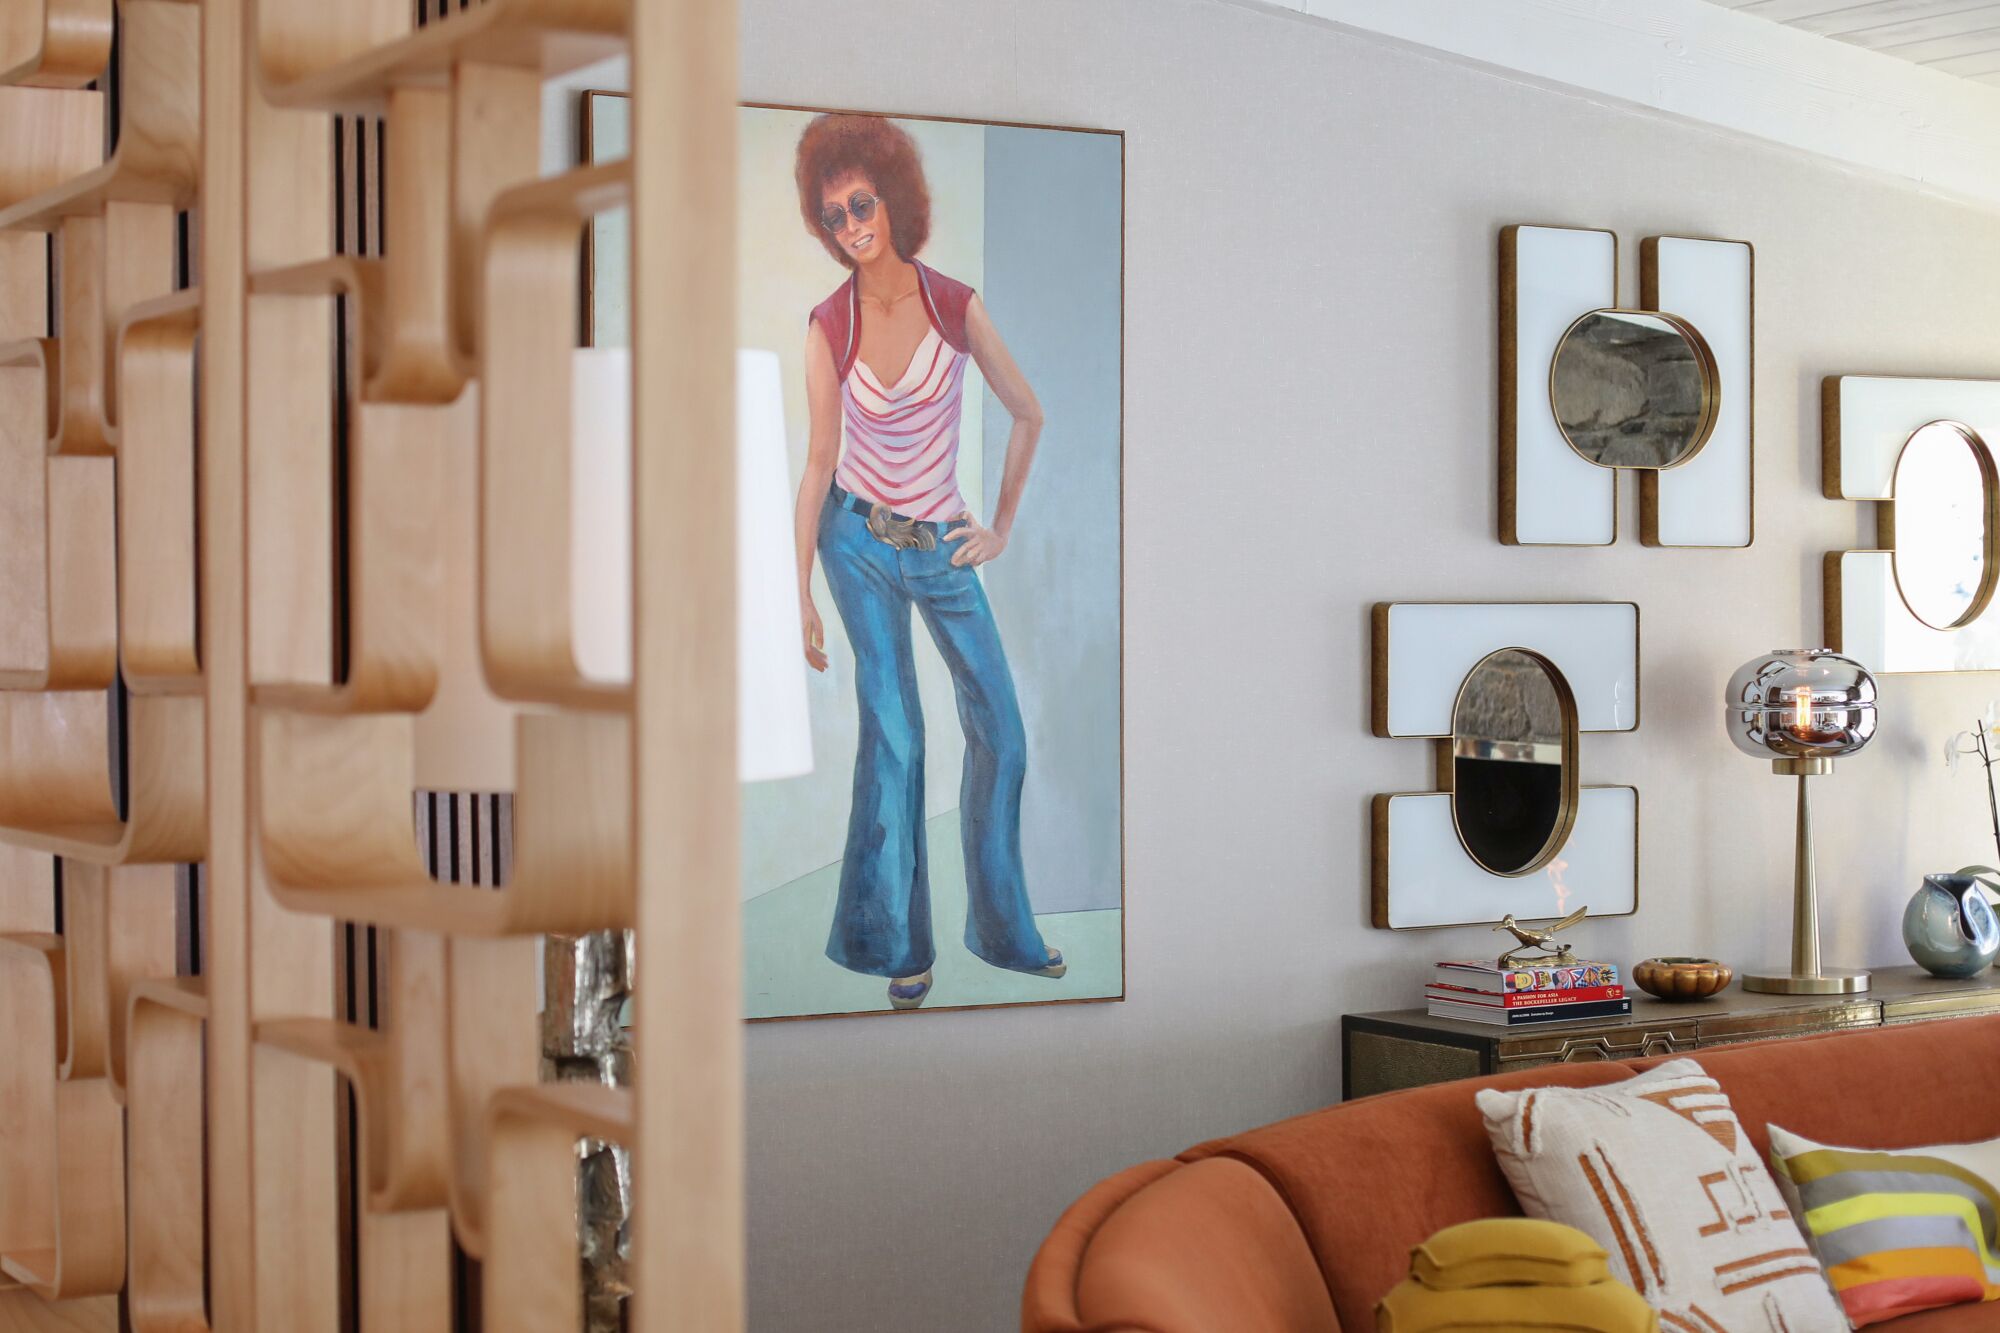 A painting of a woman on a wall, with a wooden room divider to the left and an orange couch to the right.